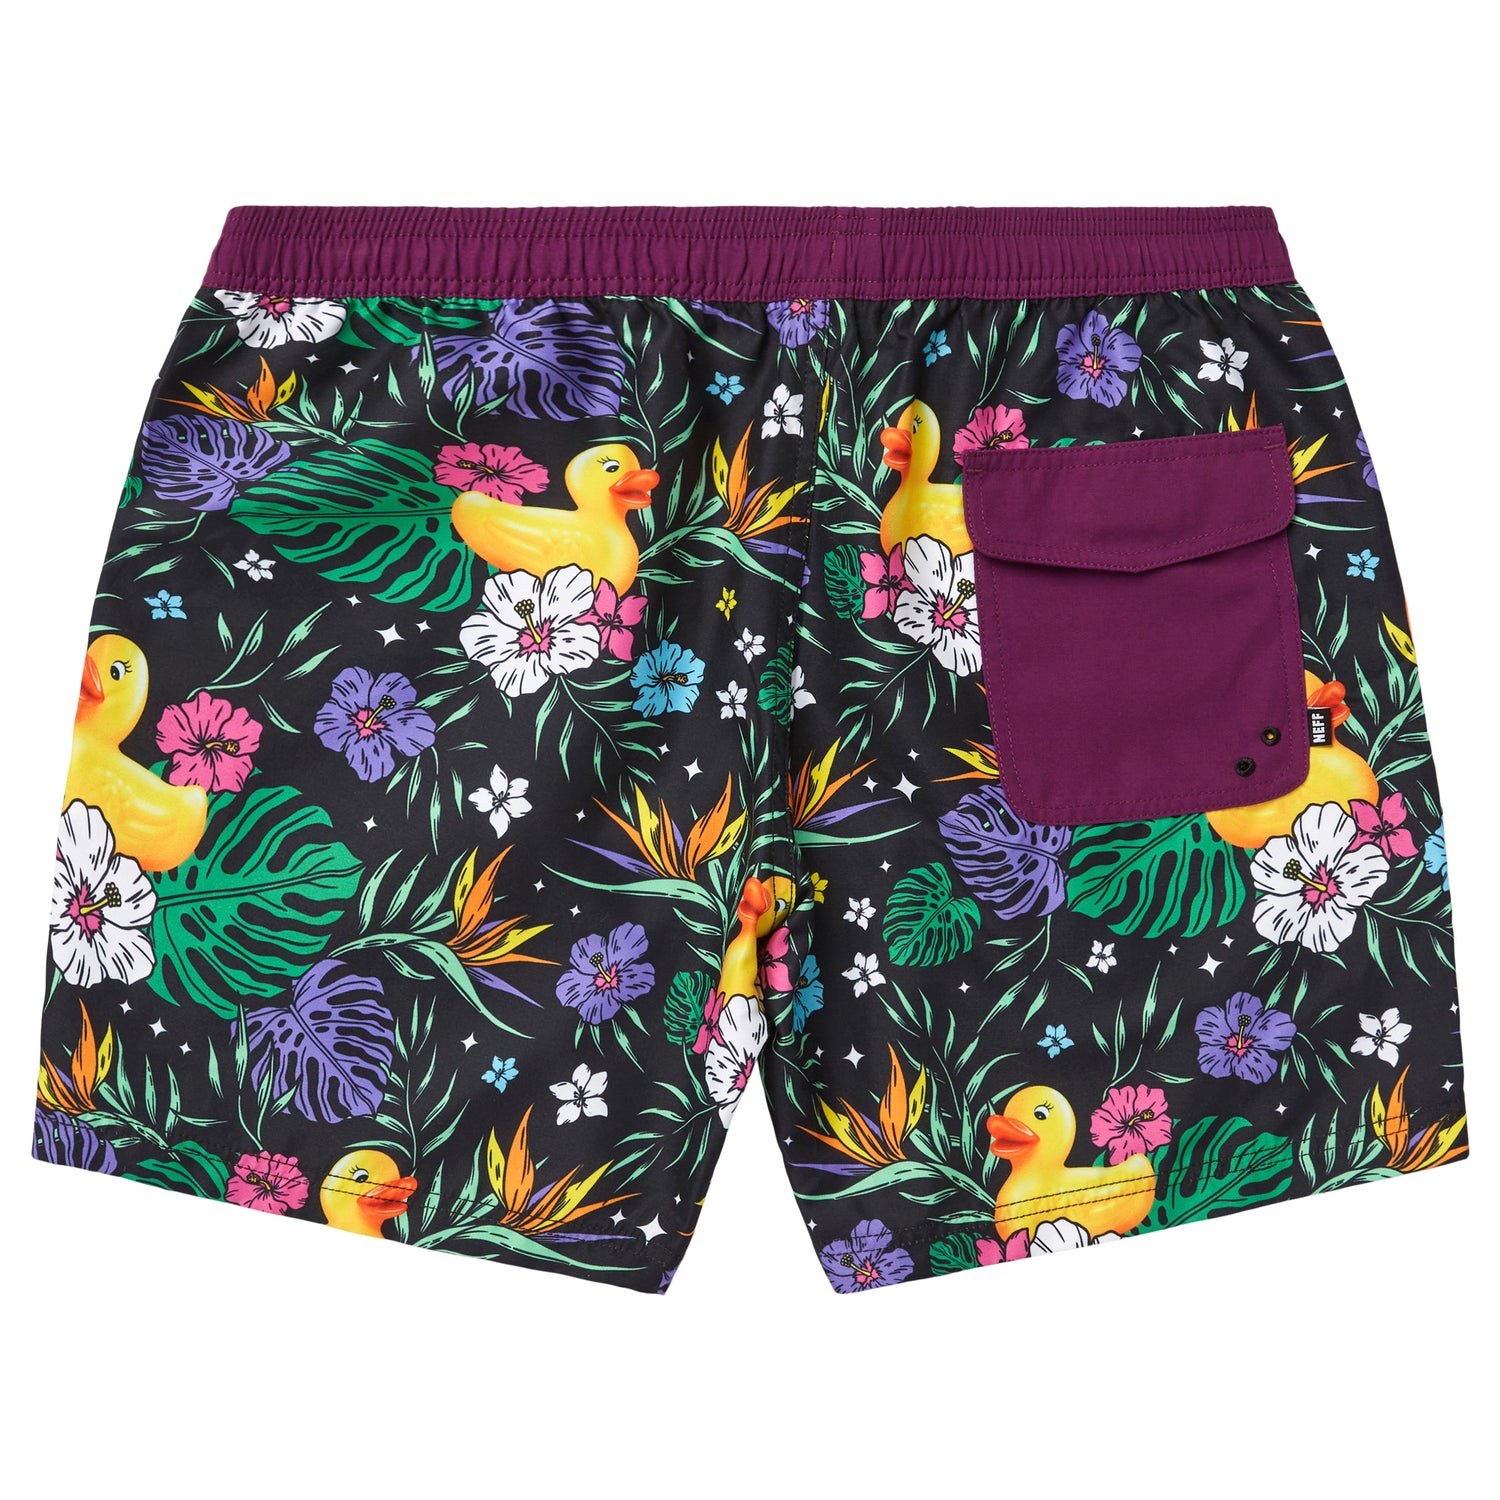 TROPICAL DUCKY 17' HOT TUB VOLLEY SHORTS - BLACK